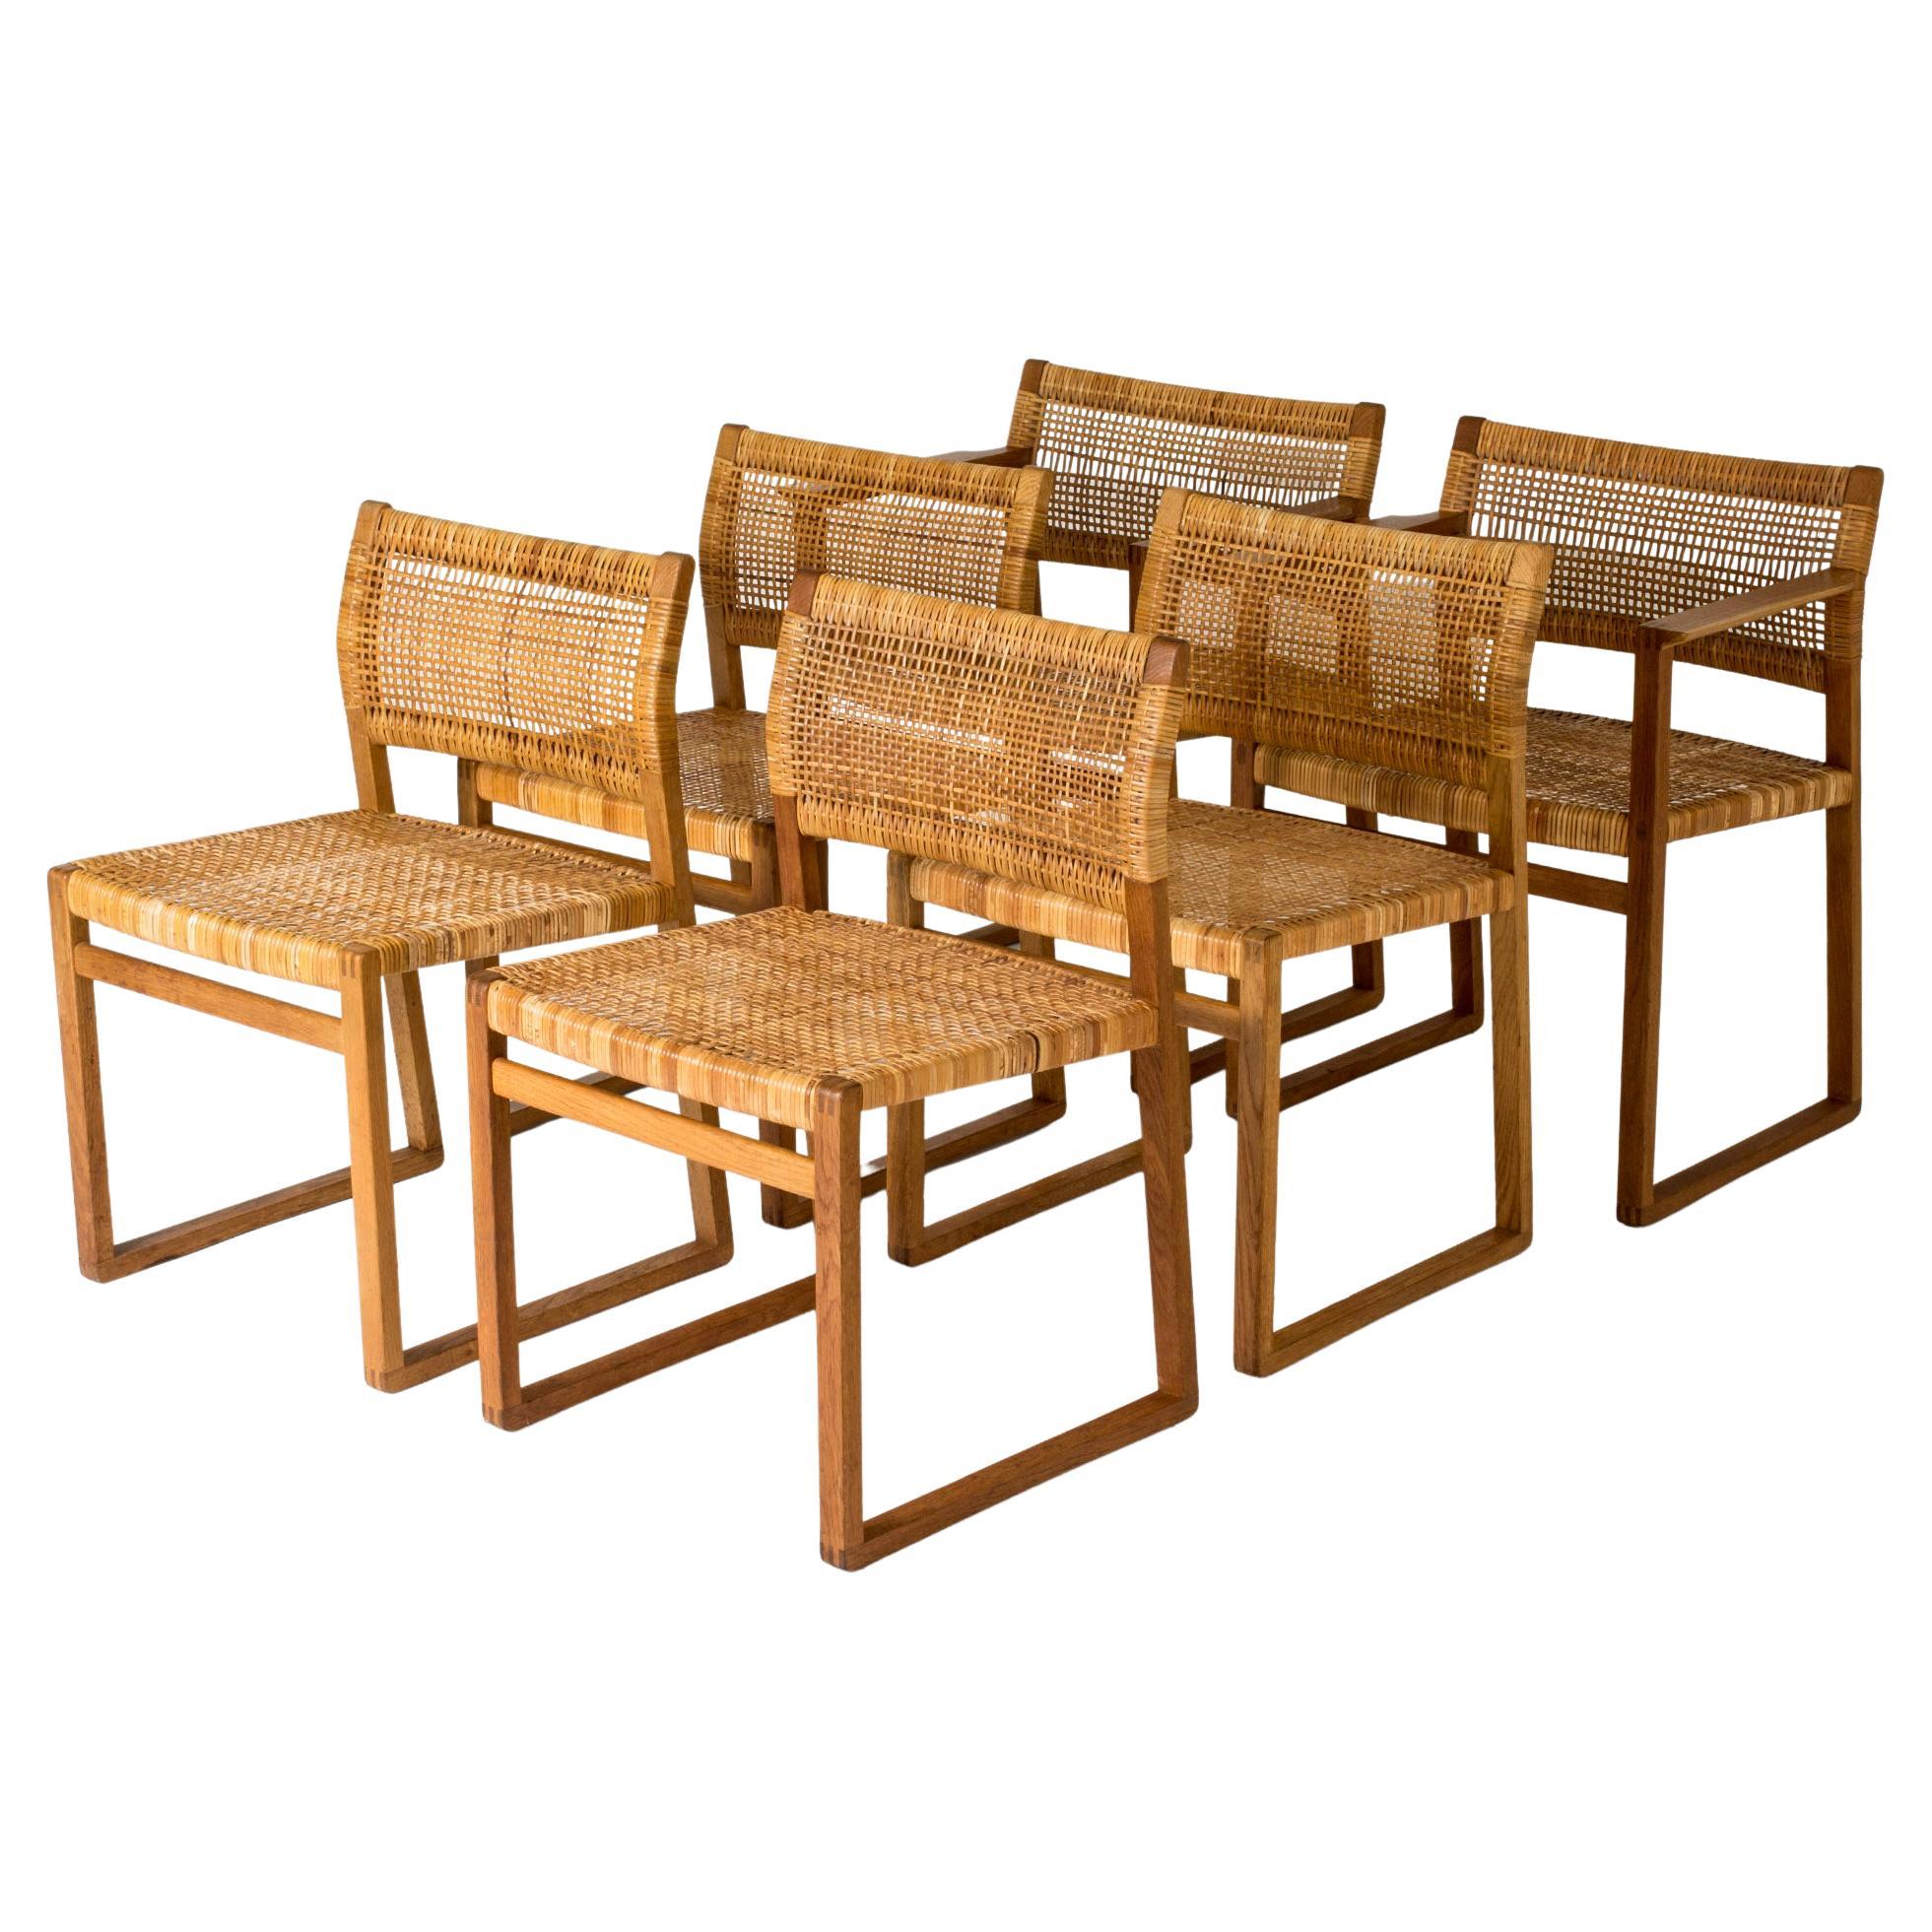 Set of six Midcentury Rattan Dining chairs by Børge Mogensen, Denmark, 1960s